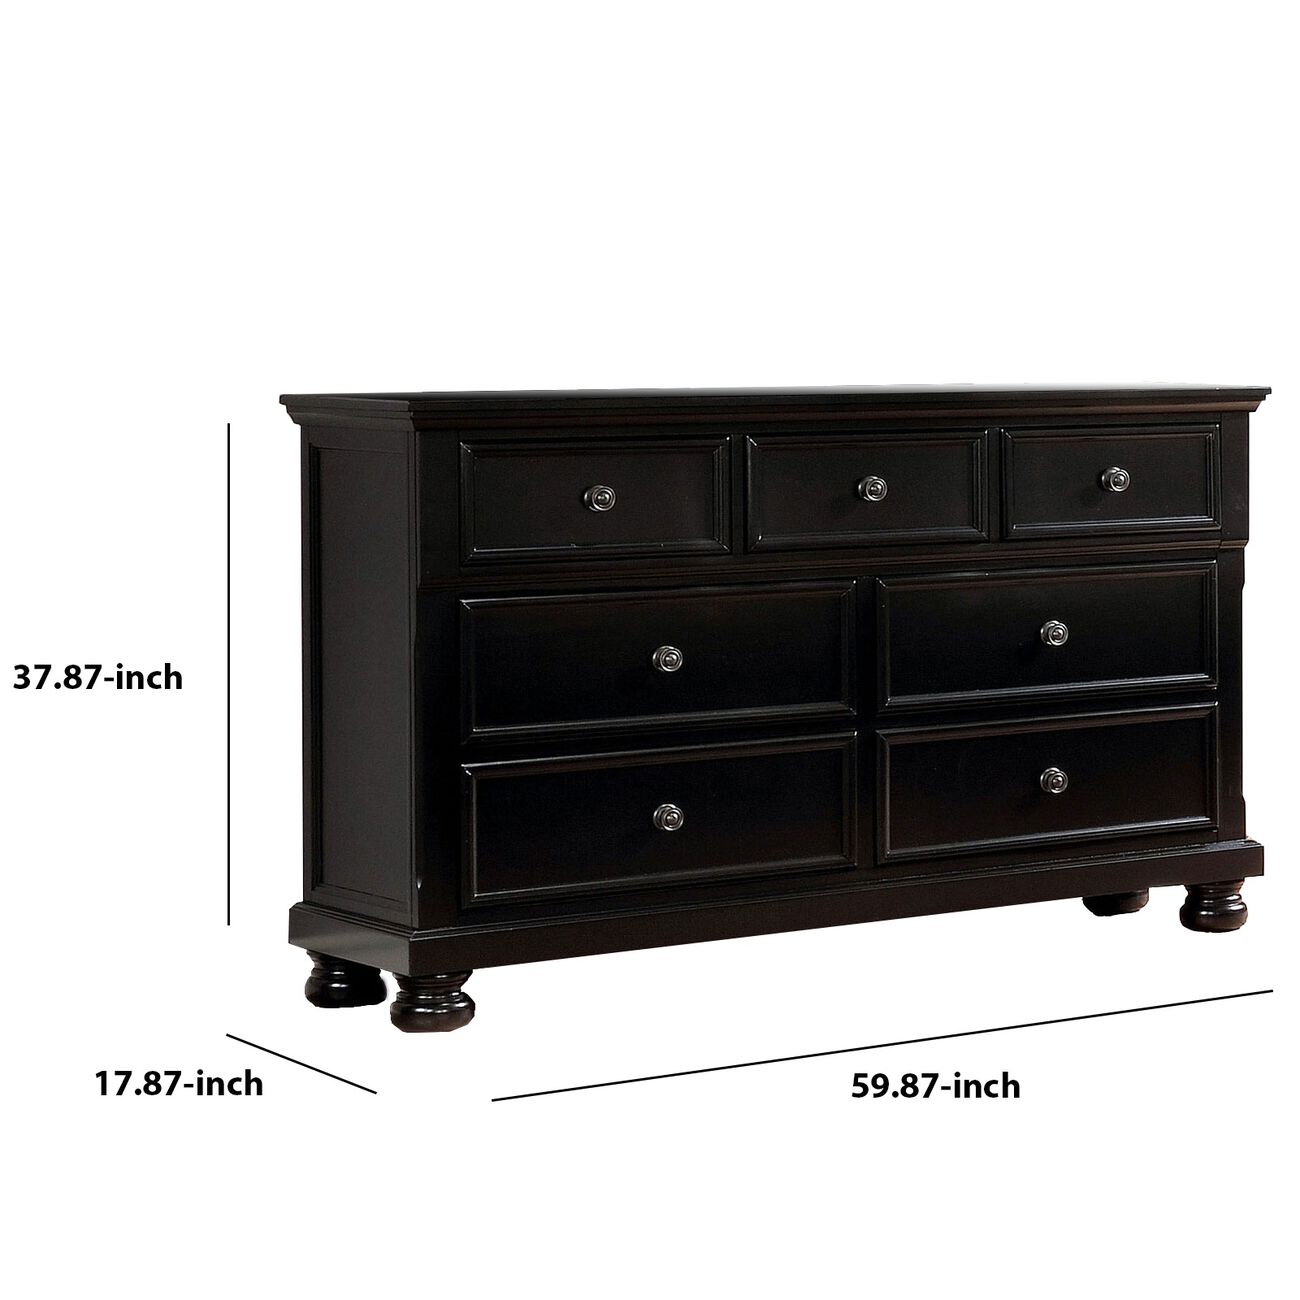 Transitional Wooden Dresser with 7 Drawers and Bun Feet, Black